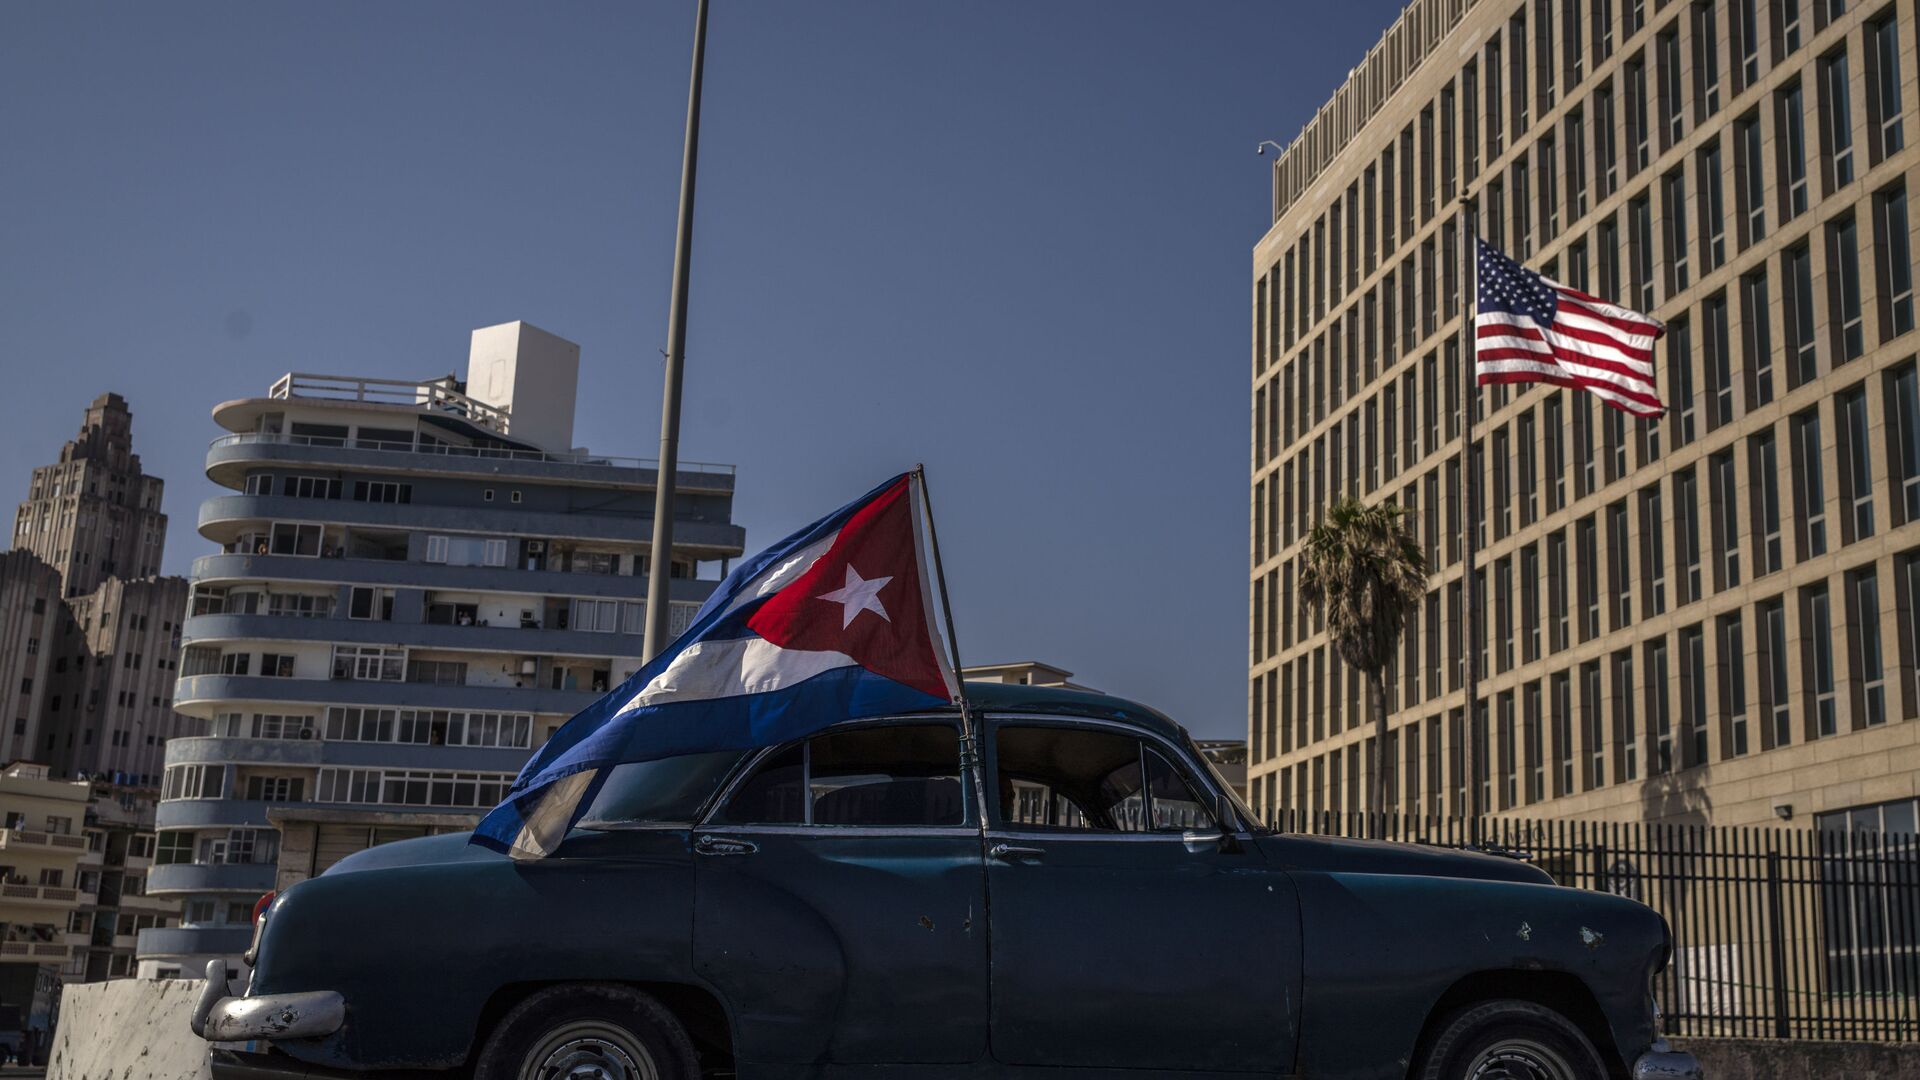 A classic American car flying a Cuban flag drives past the American embassy during a rally calling for the end of the US blockade against the island nation, in Havana, Cuba, Sunday, March 28, 2021. - Sputnik International, 1920, 28.06.2021